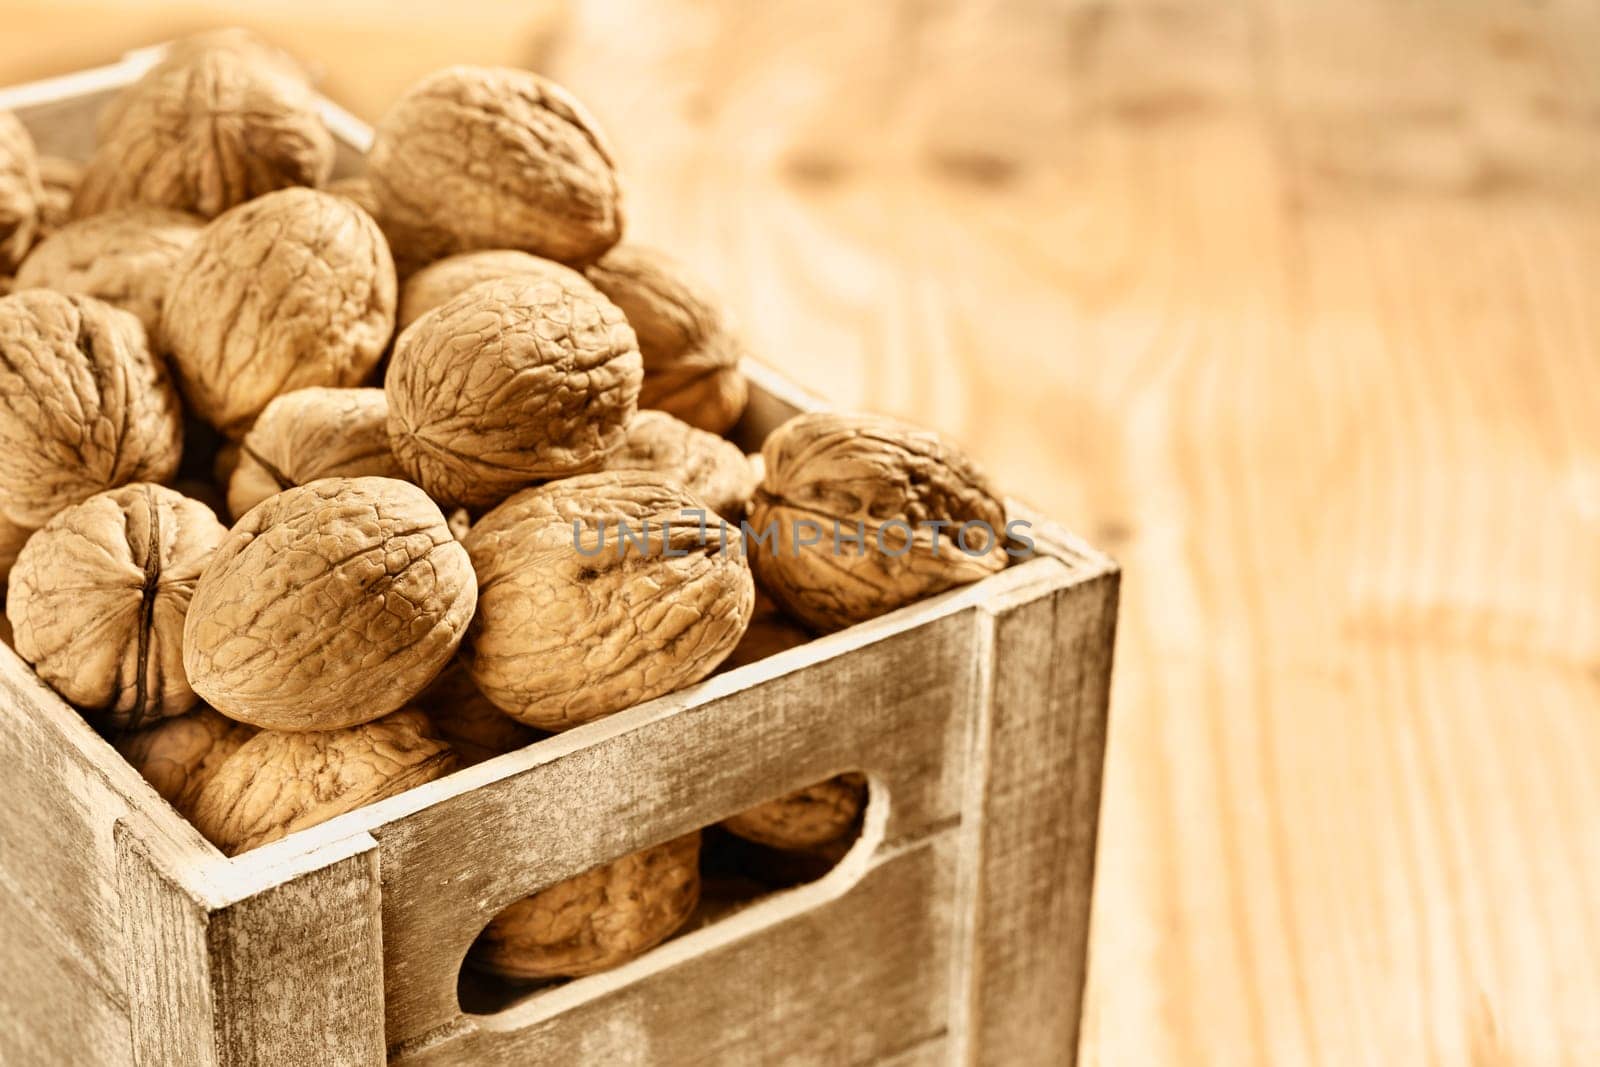 Fruit of walnuts in wooden box , healthy eating ,nutritional supplement